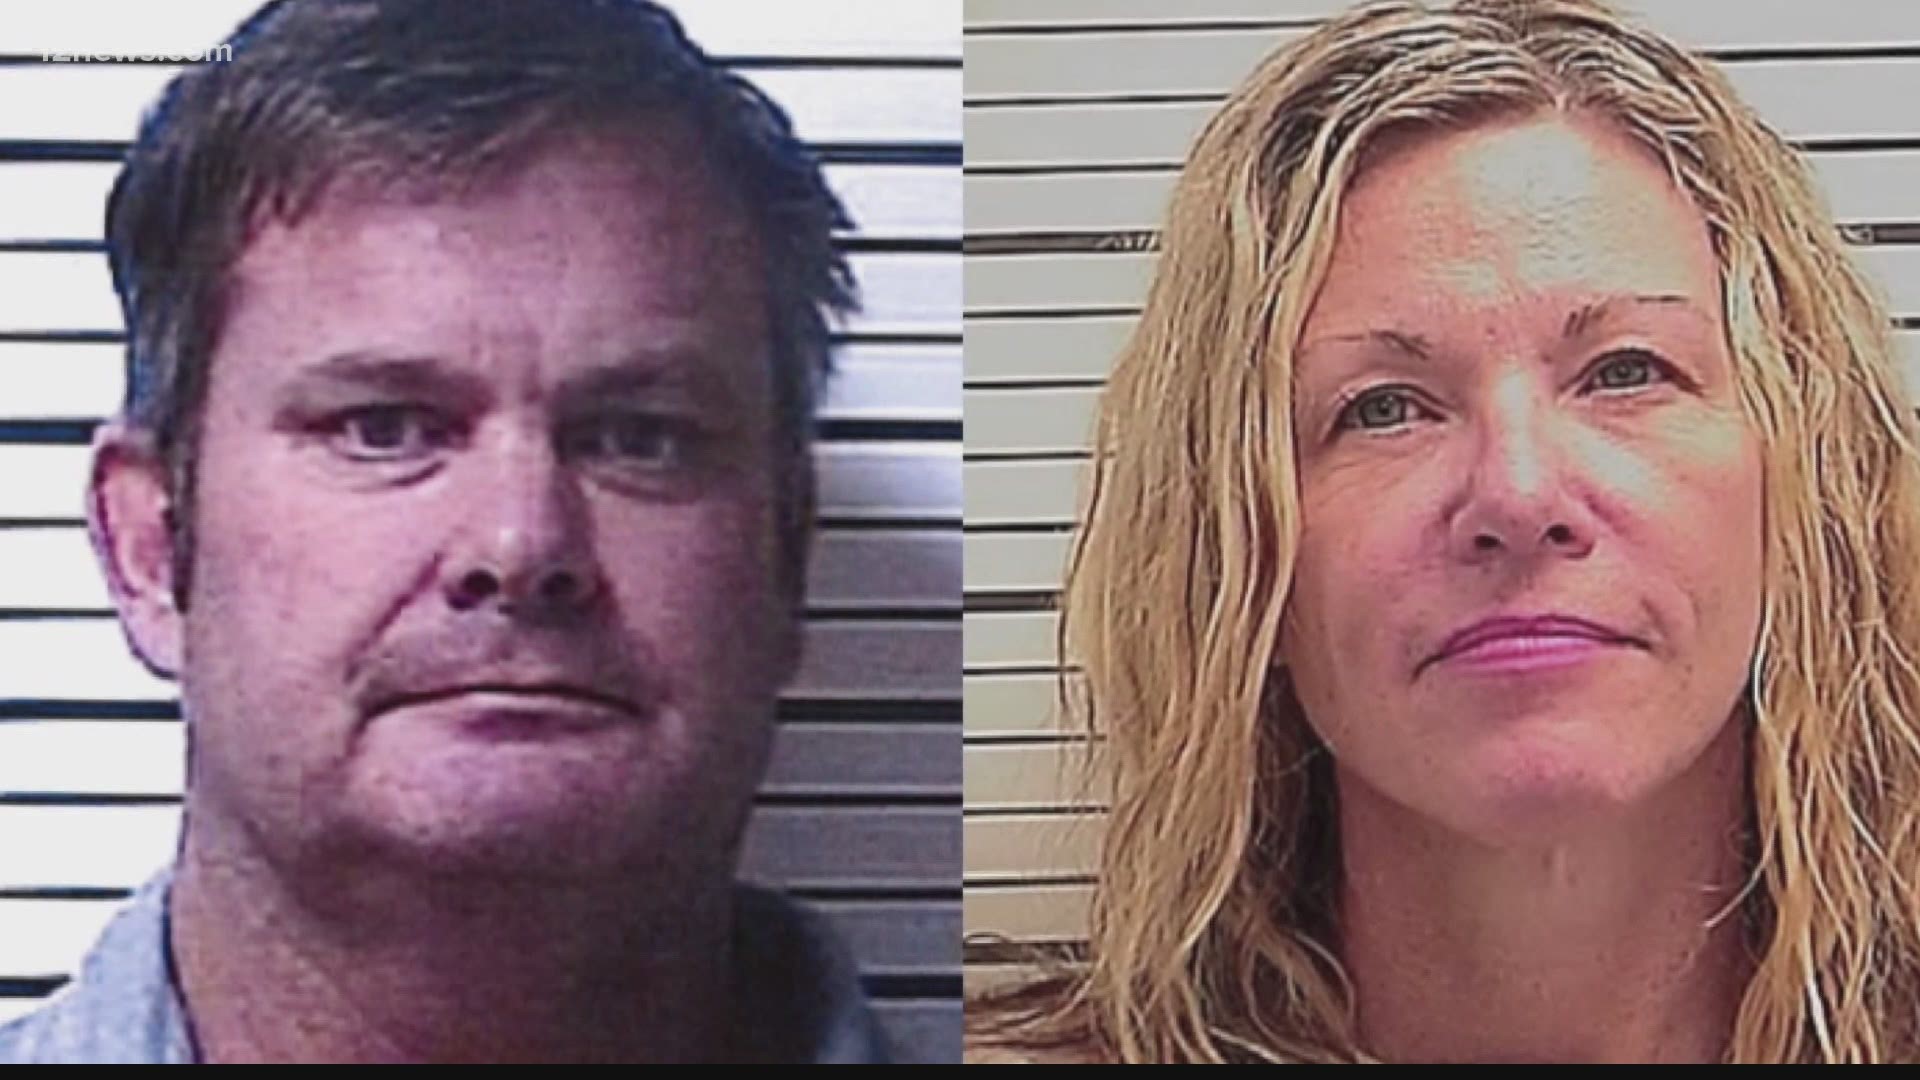 The couple is accused of killing Lori Vallow Daybell's children, Tylee and JJ.  Chad Daybell is also charged with murder in the death of his first wife, Tammy.